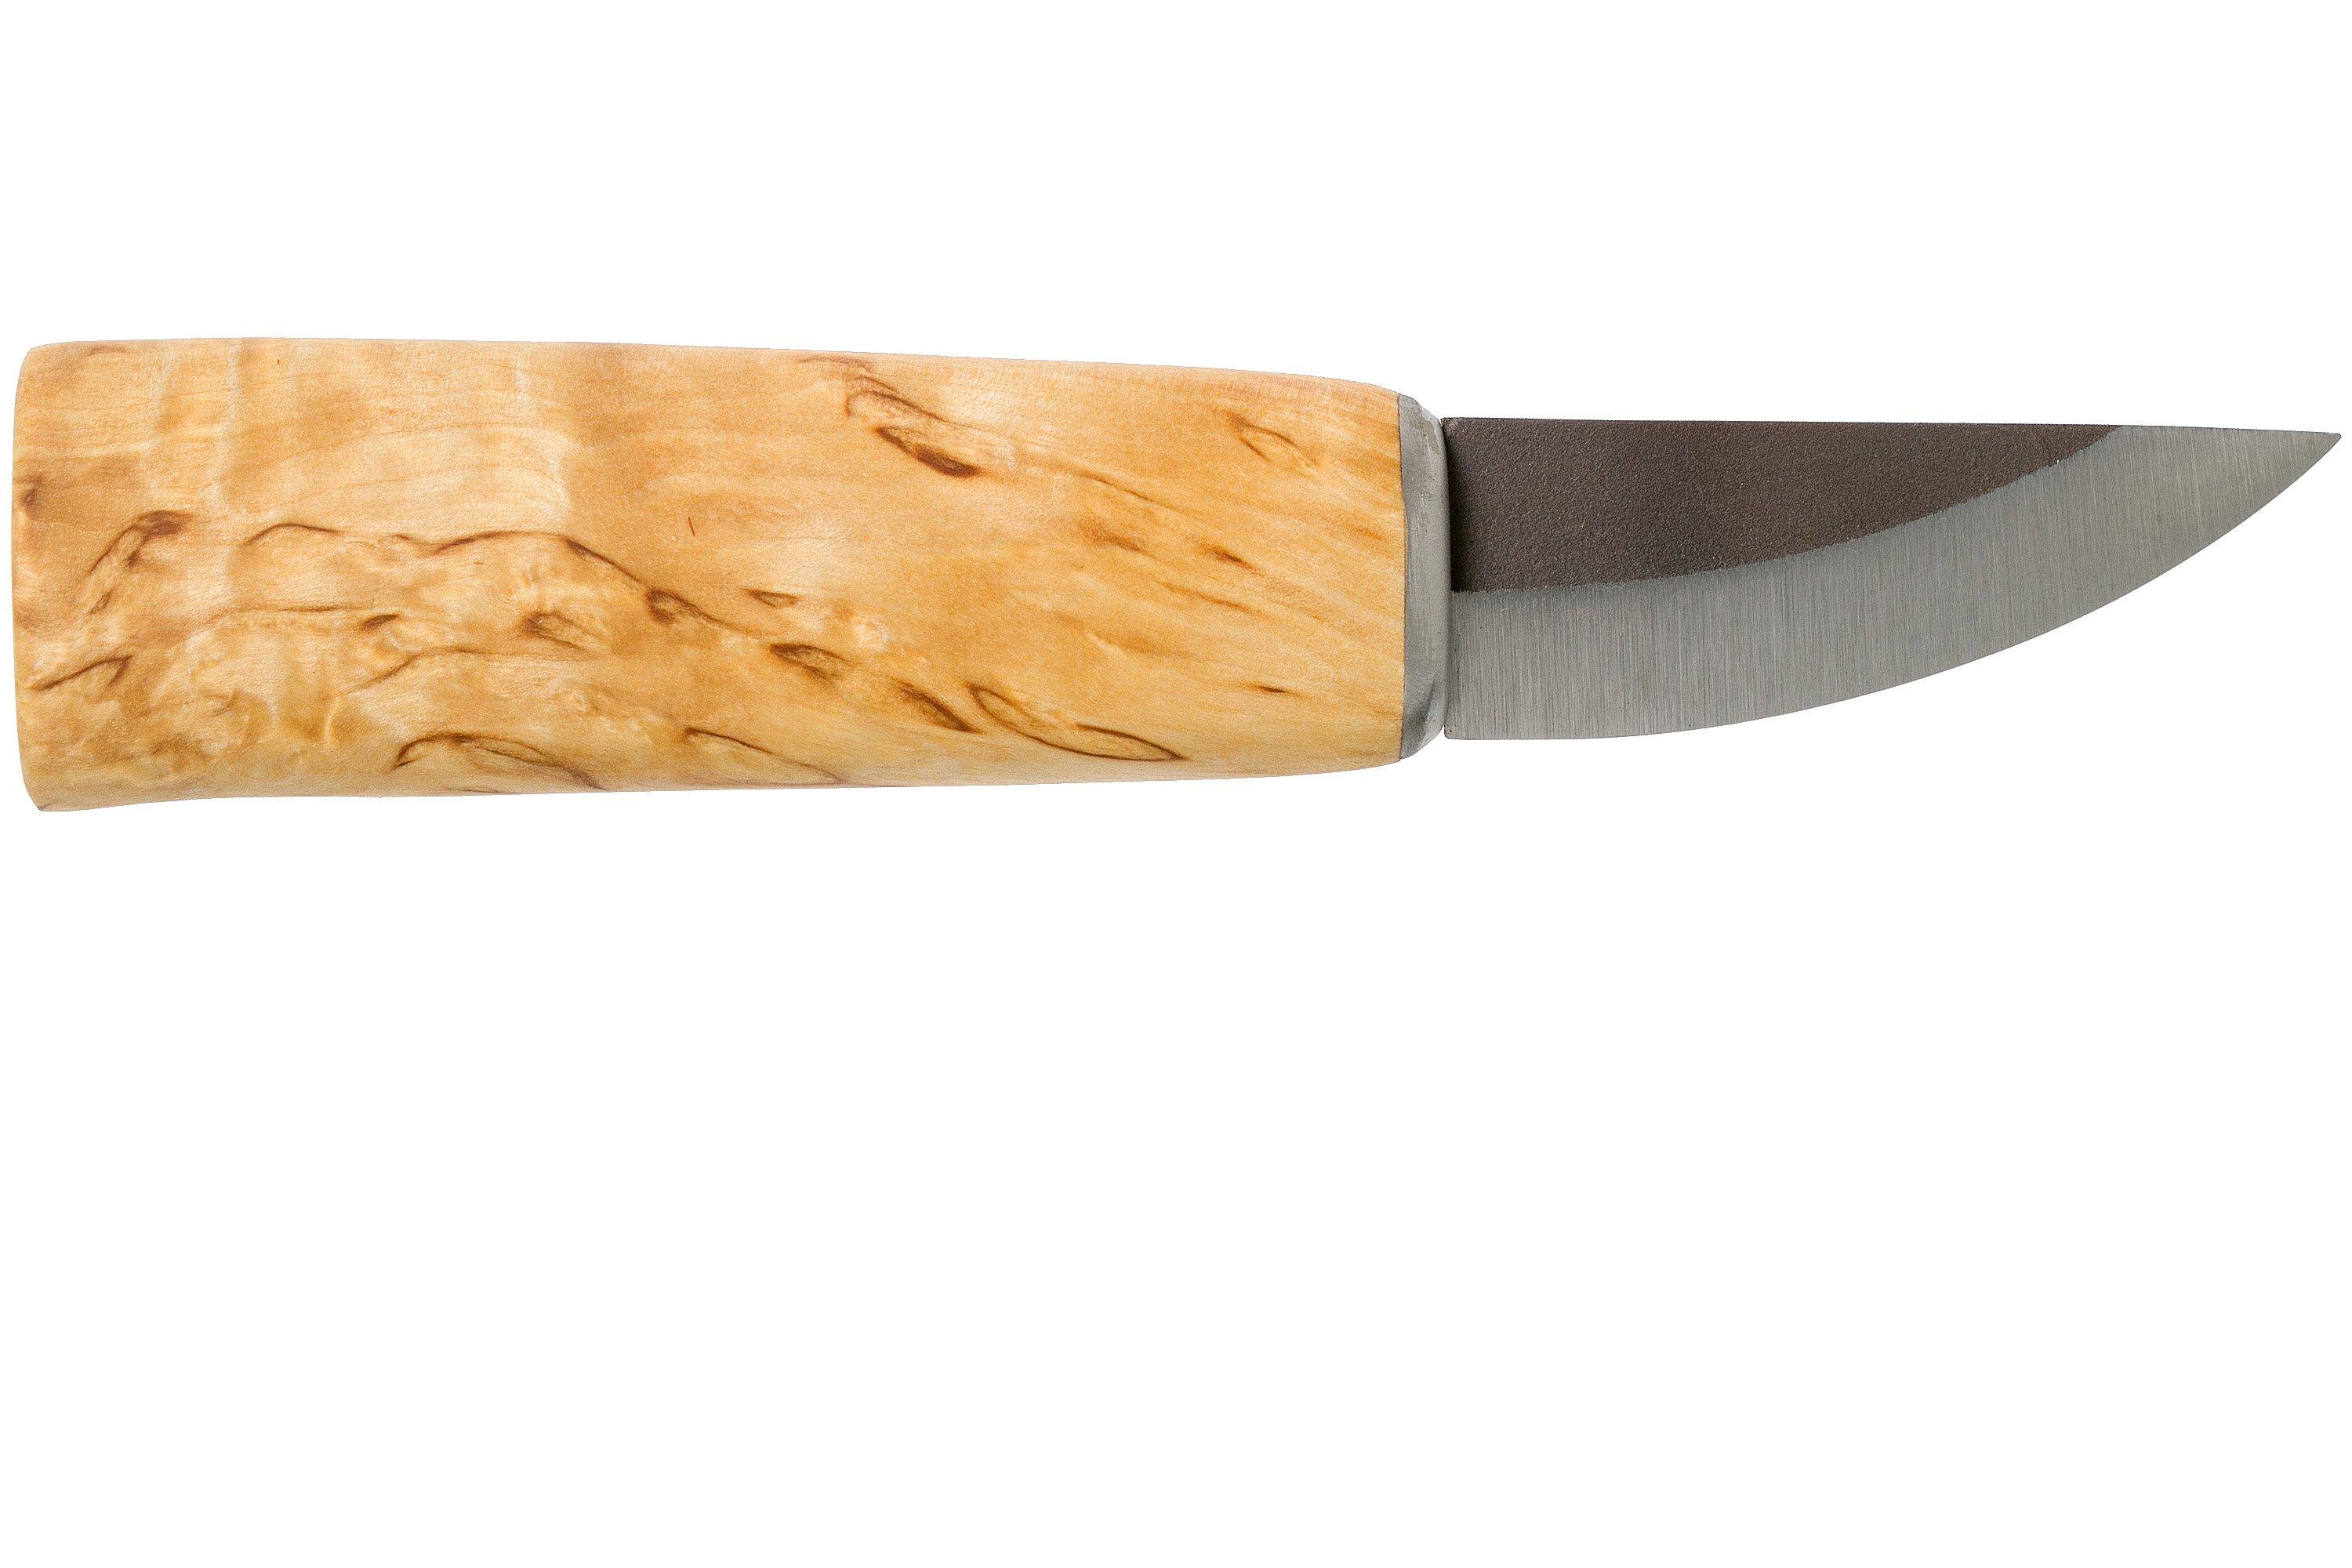 Japanese Chef Knife Large By Roselli